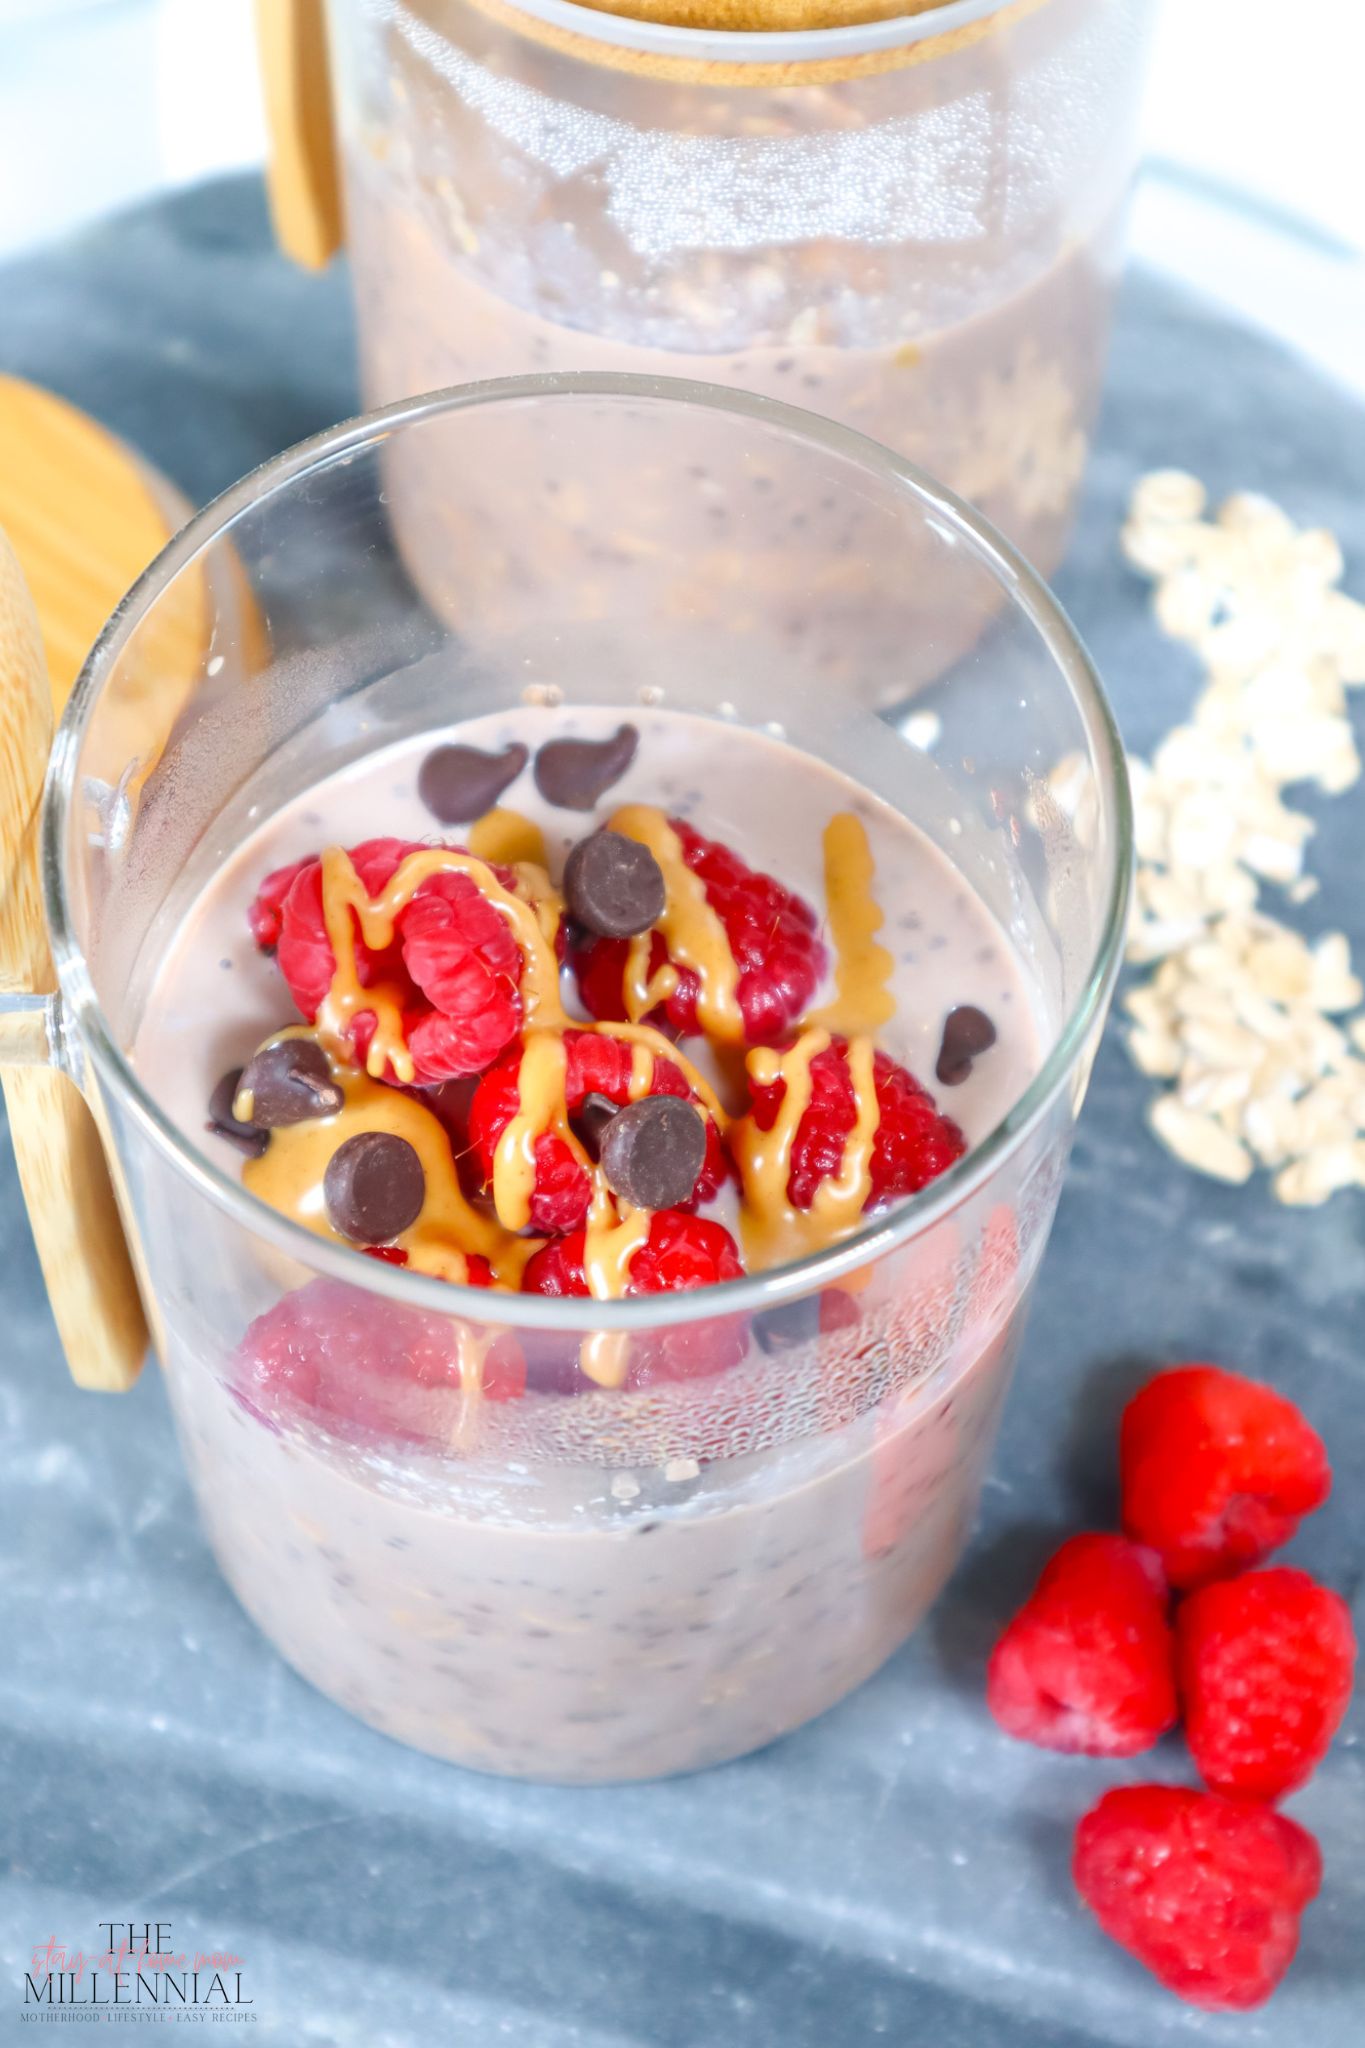 These chocolate peanut butter overnight oats are absolutely delicious, full of protein and made with only 5 ingredients!